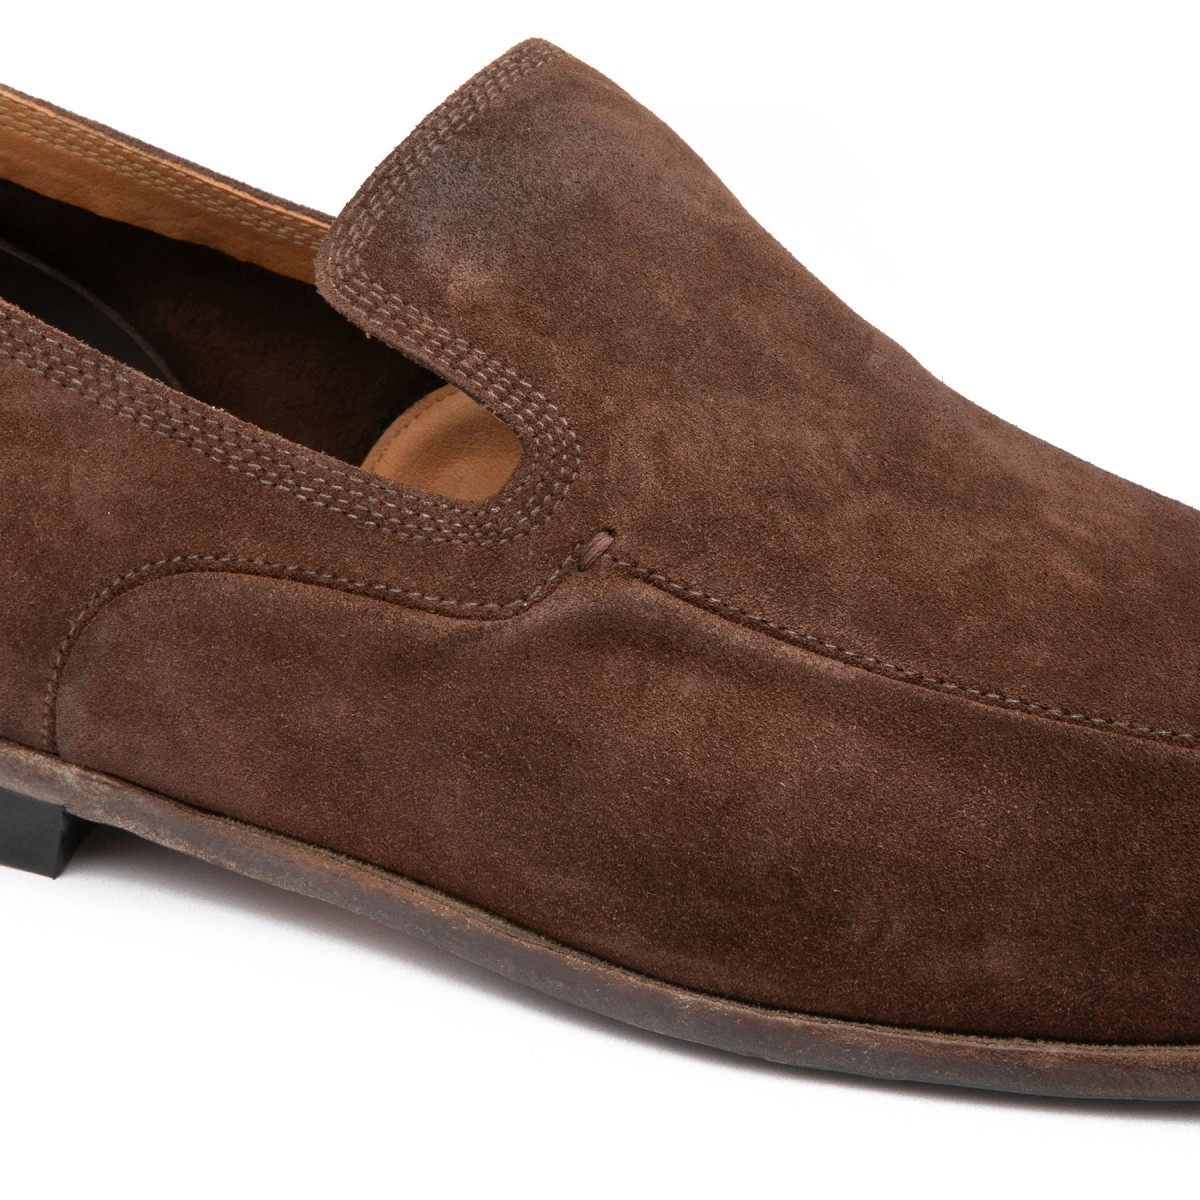 Brown suede loafers